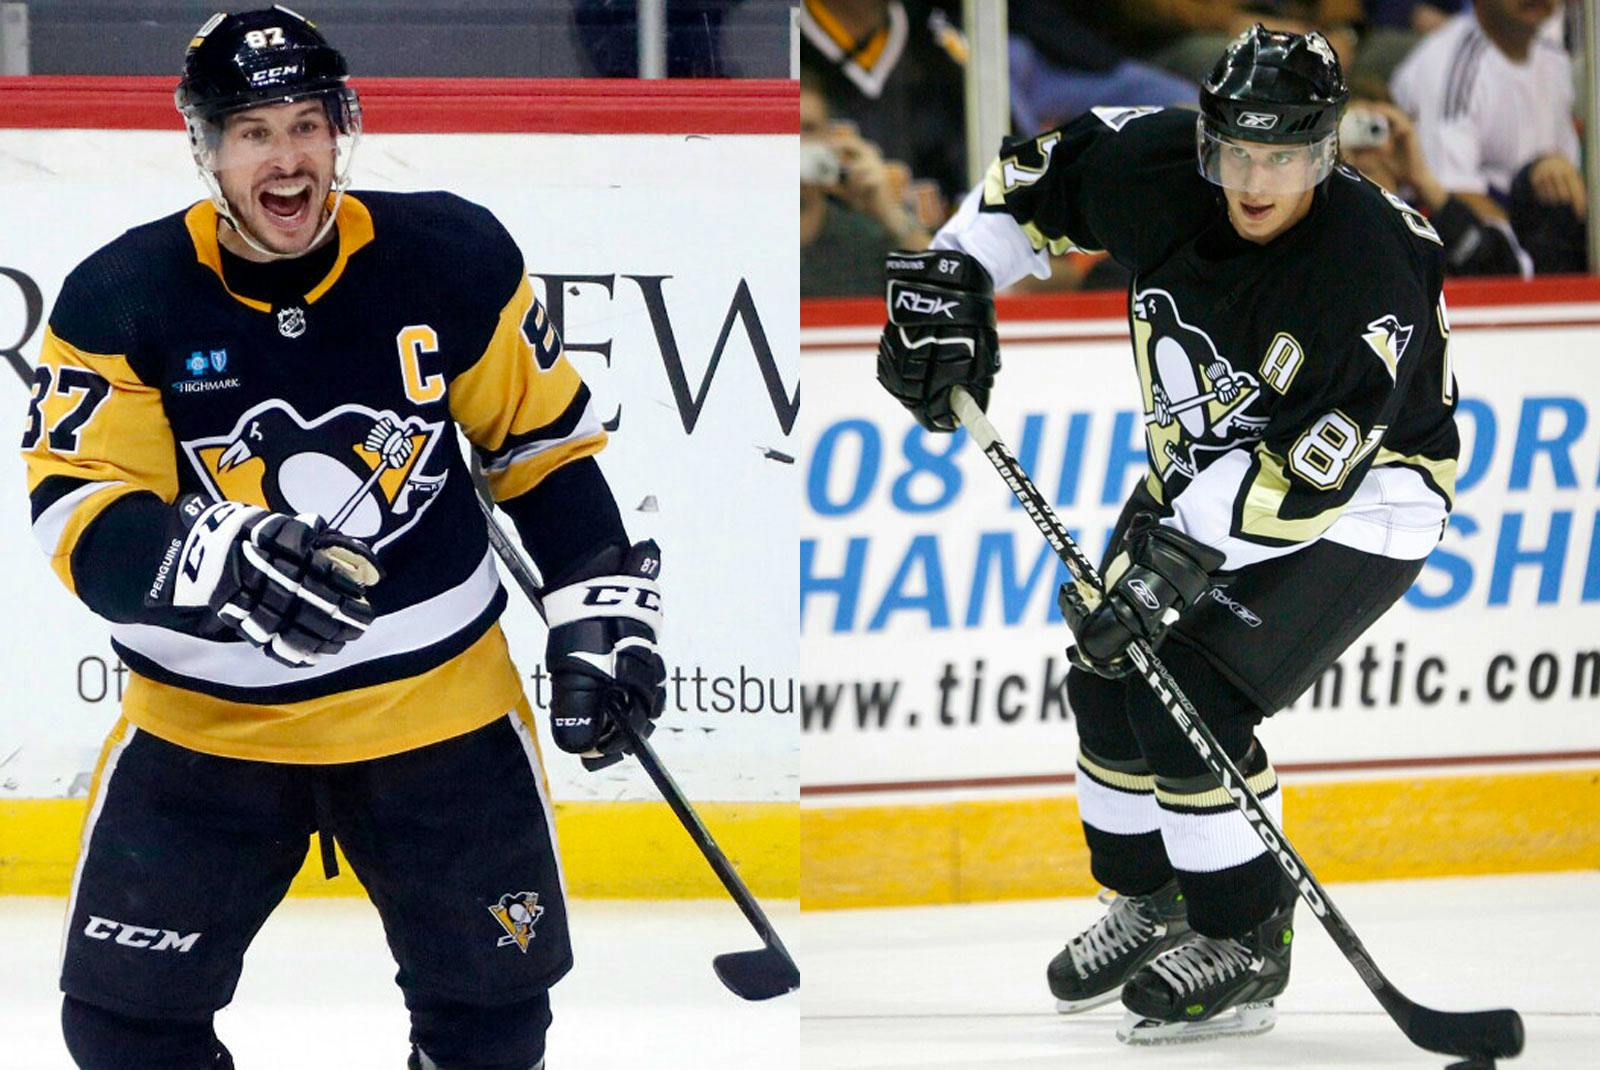 Pittsburgh Penguins' Sidney Crosby won't play for Team Canada at Worlds 